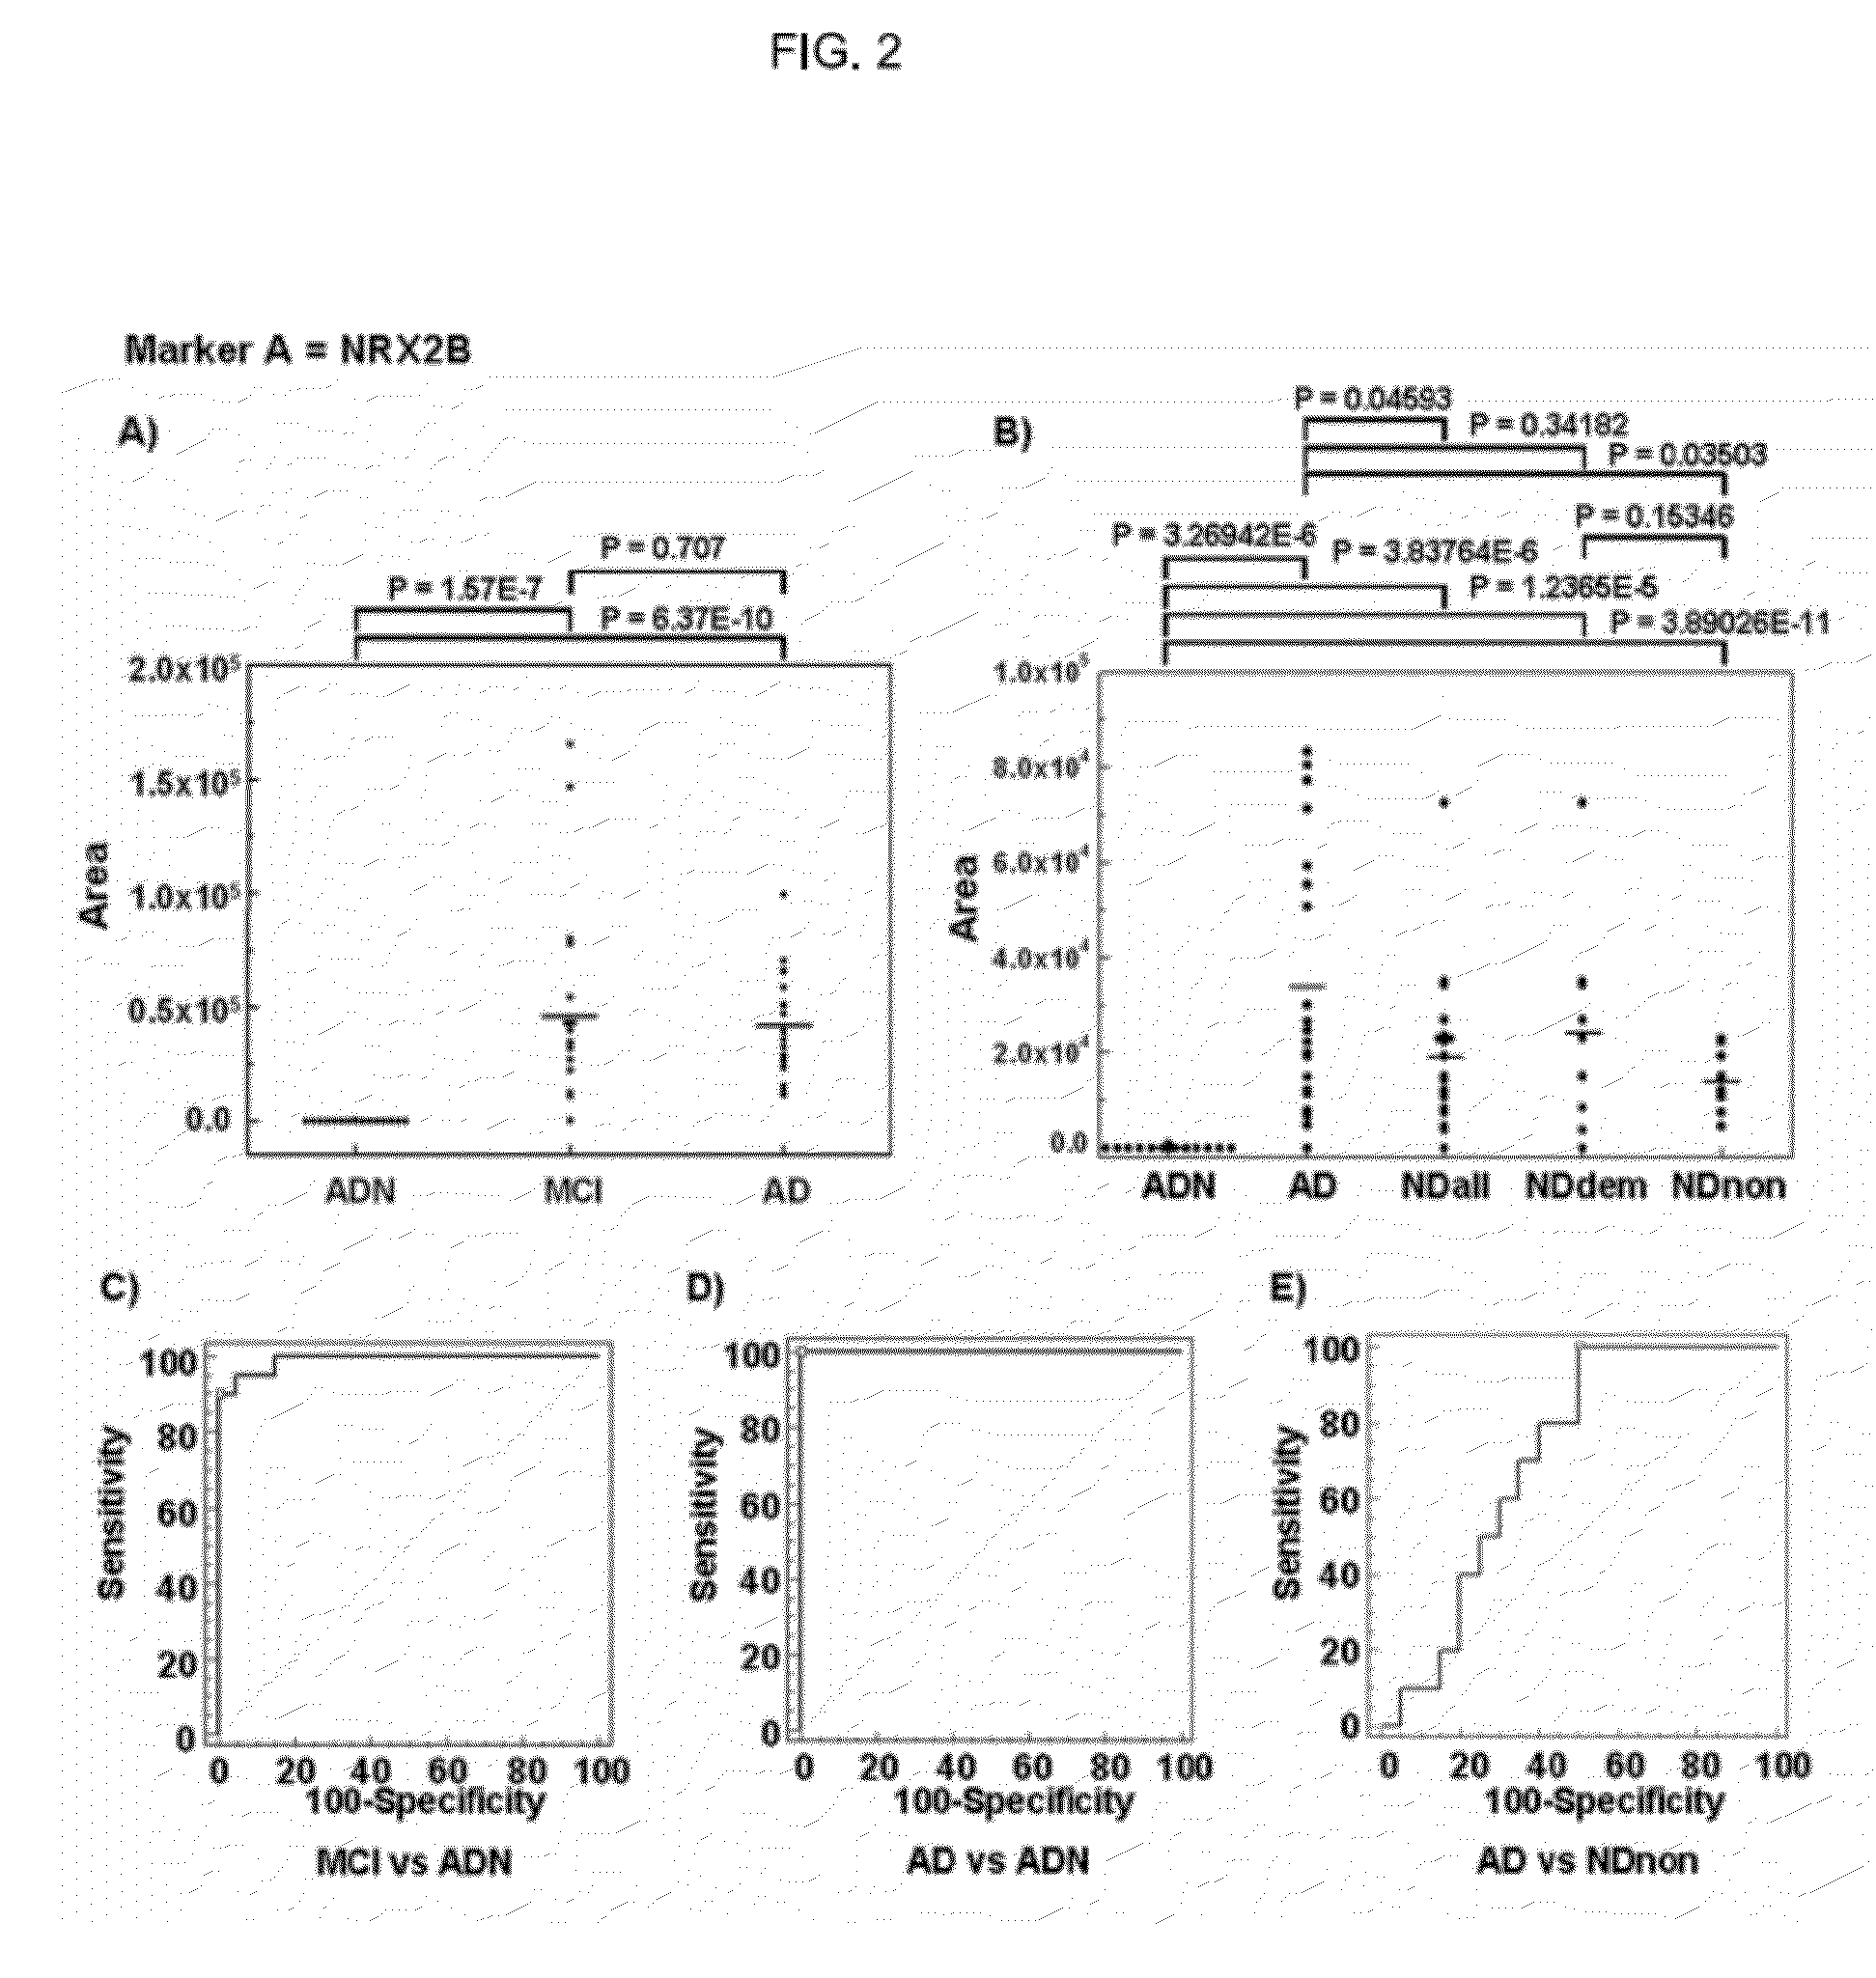 Biomarker for psychiatric diseases including cognitive impairment and methods for detecting psychiatric diseases including cognitive impairment using the biomarkers